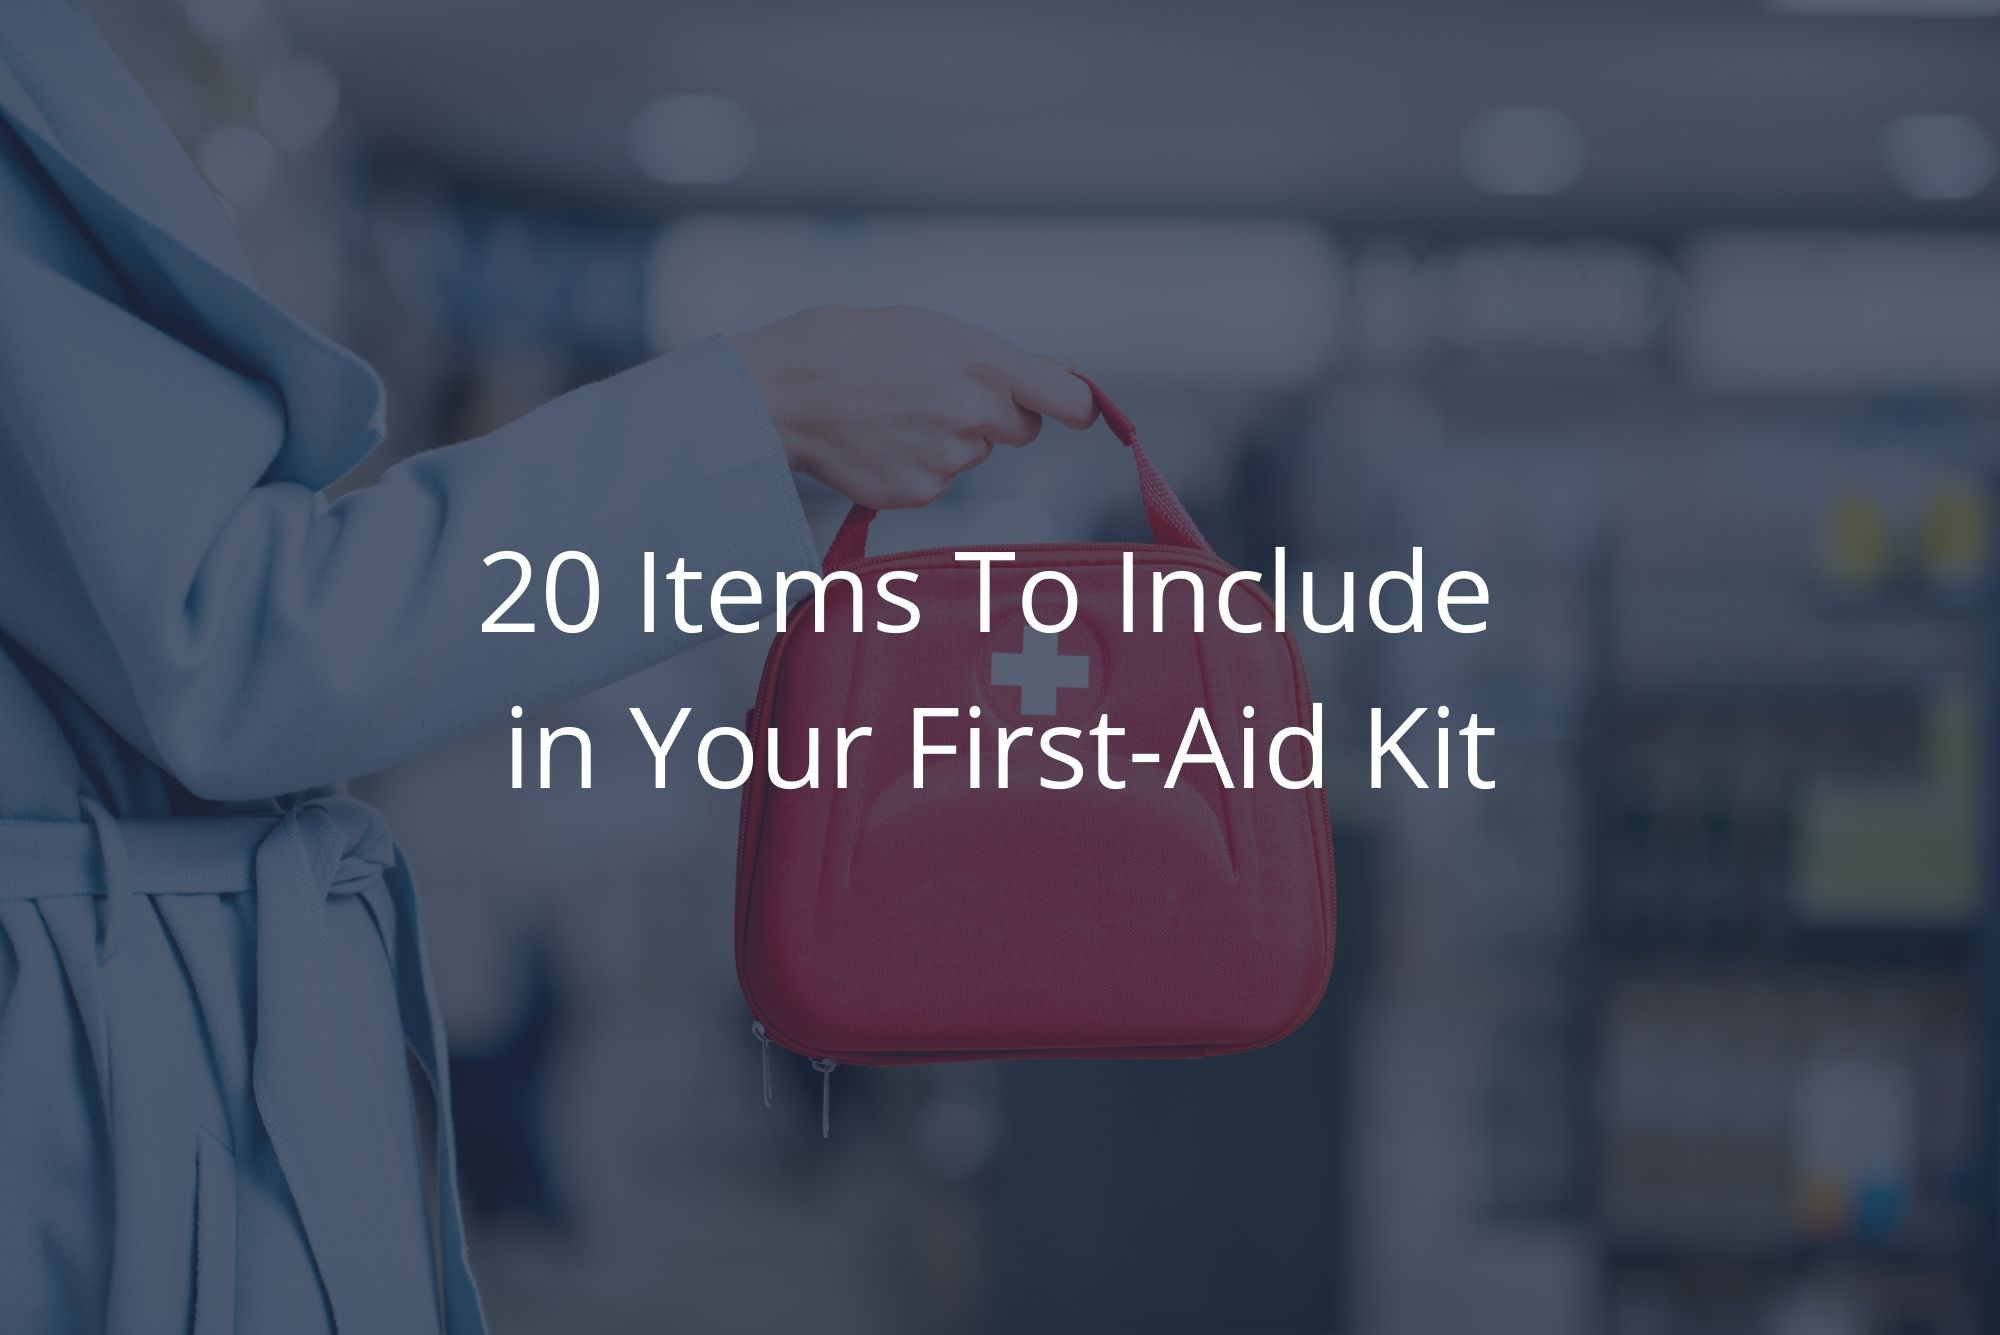 A person in a blue coat holds a red first aid kit containing 20 items. 